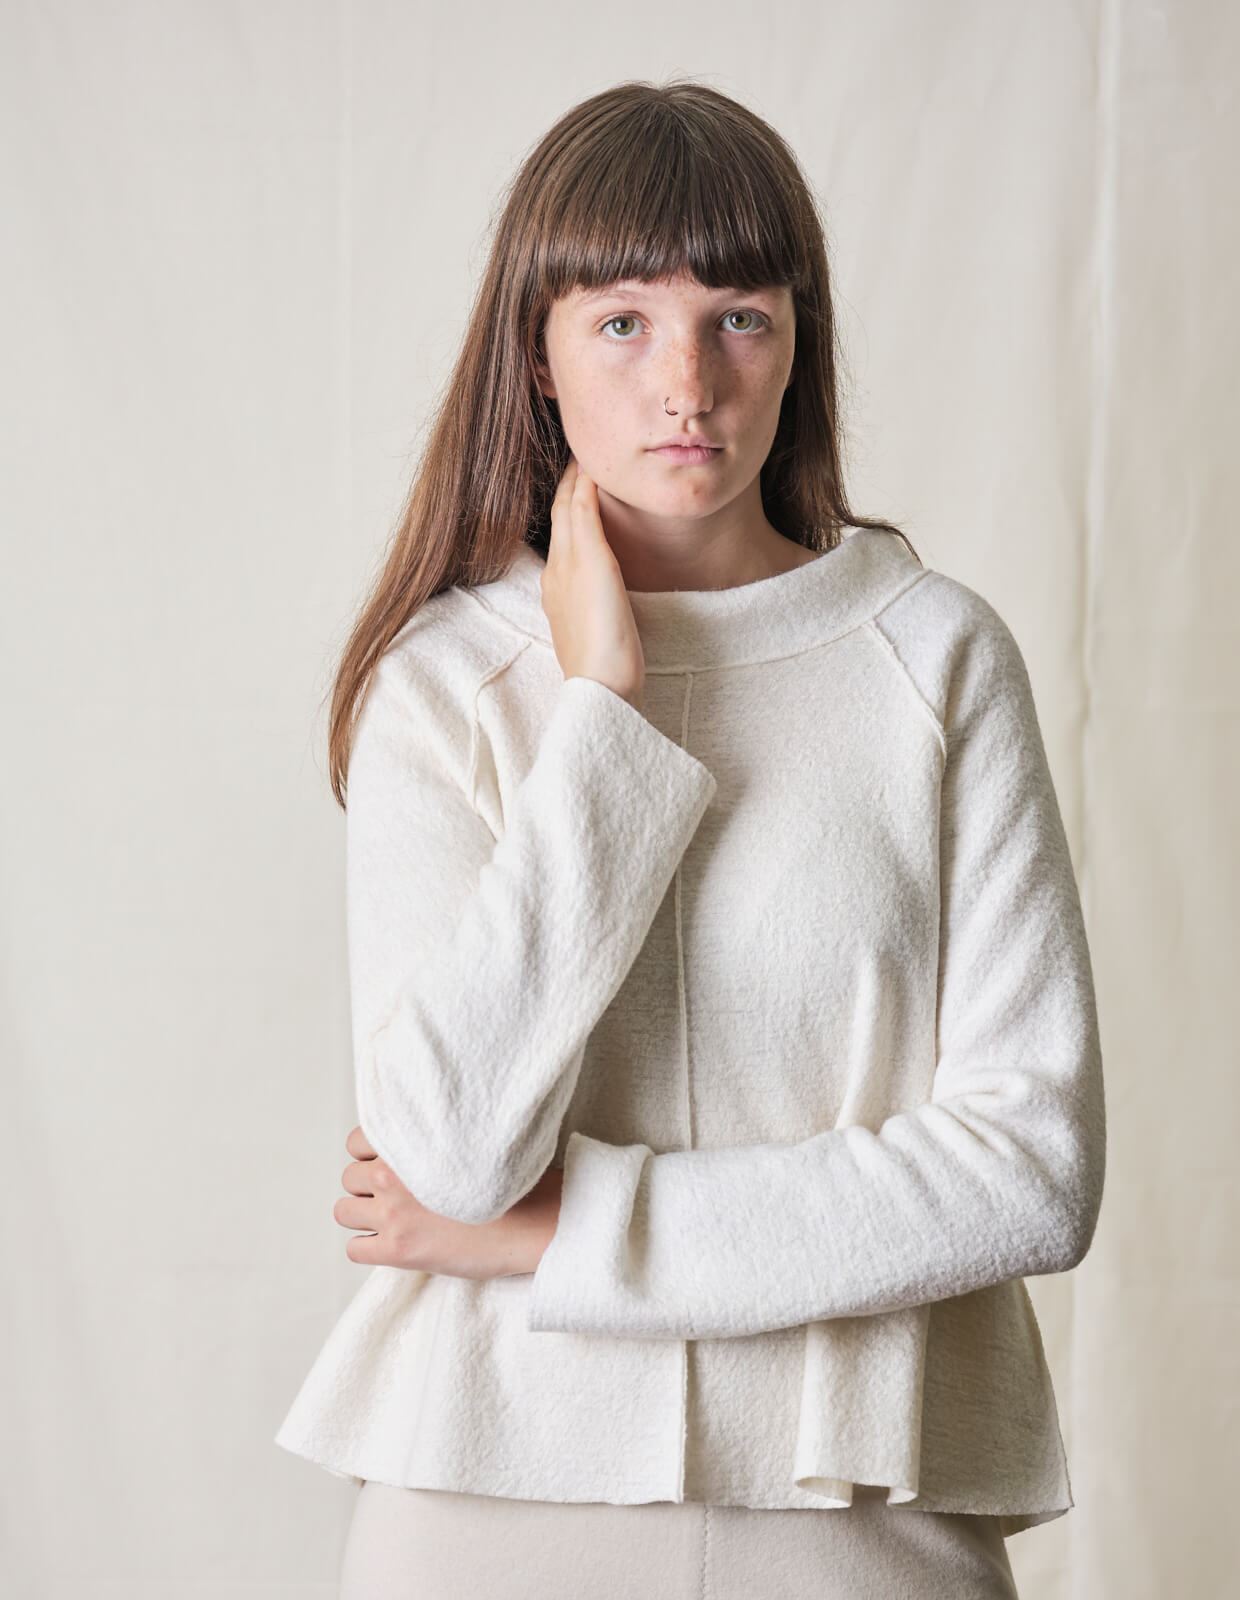 The Maker's Atelier Flared Tunic and Top